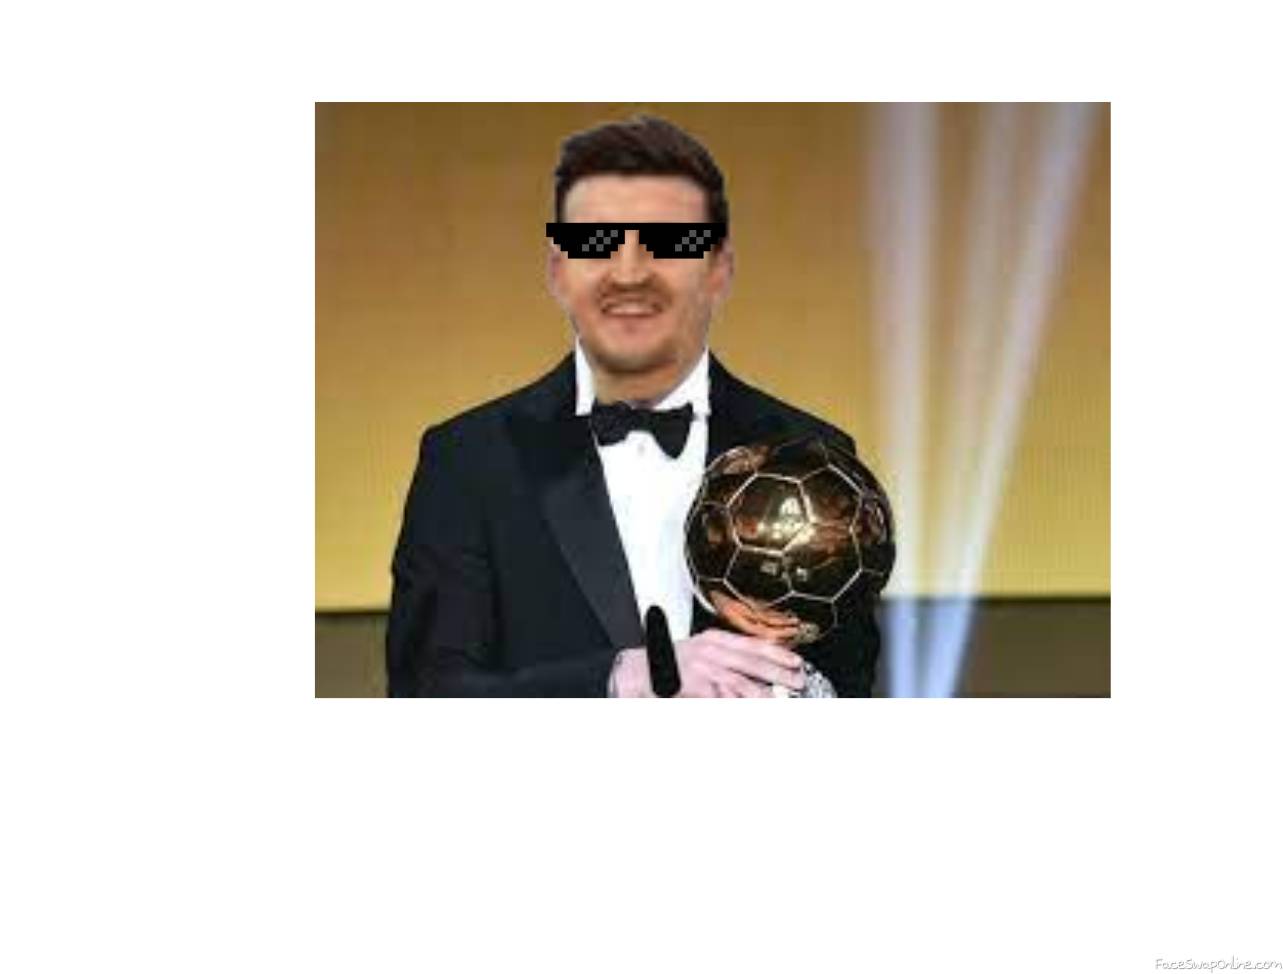 What!? Maguire wins Ballondor?